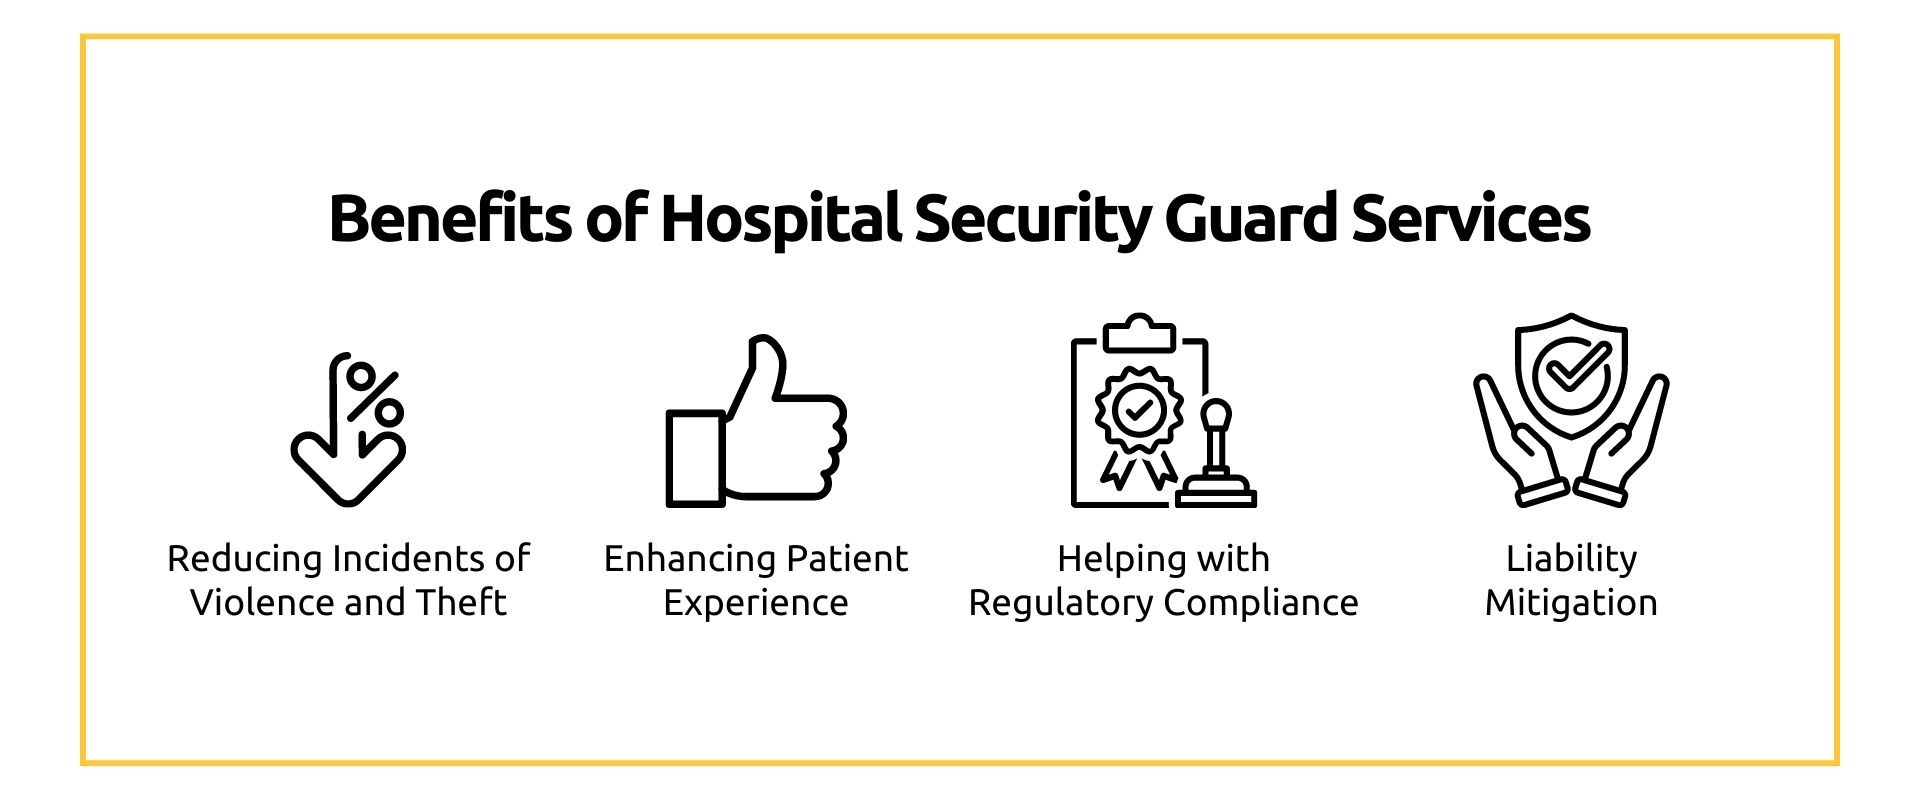 Benefits of Hospital Security Guard Services